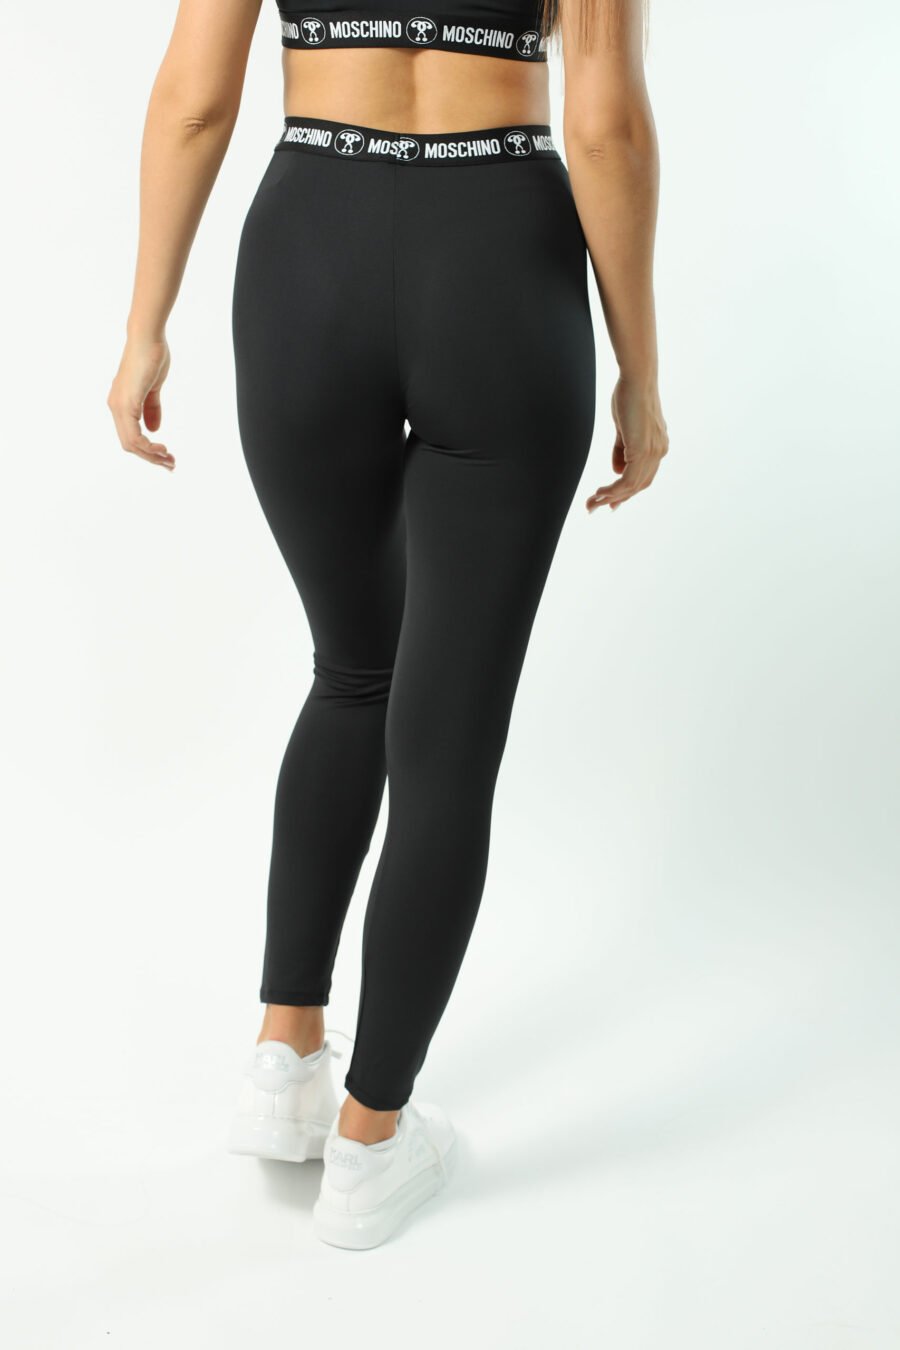 Black leggings with double question logo on tape - Photos 2952